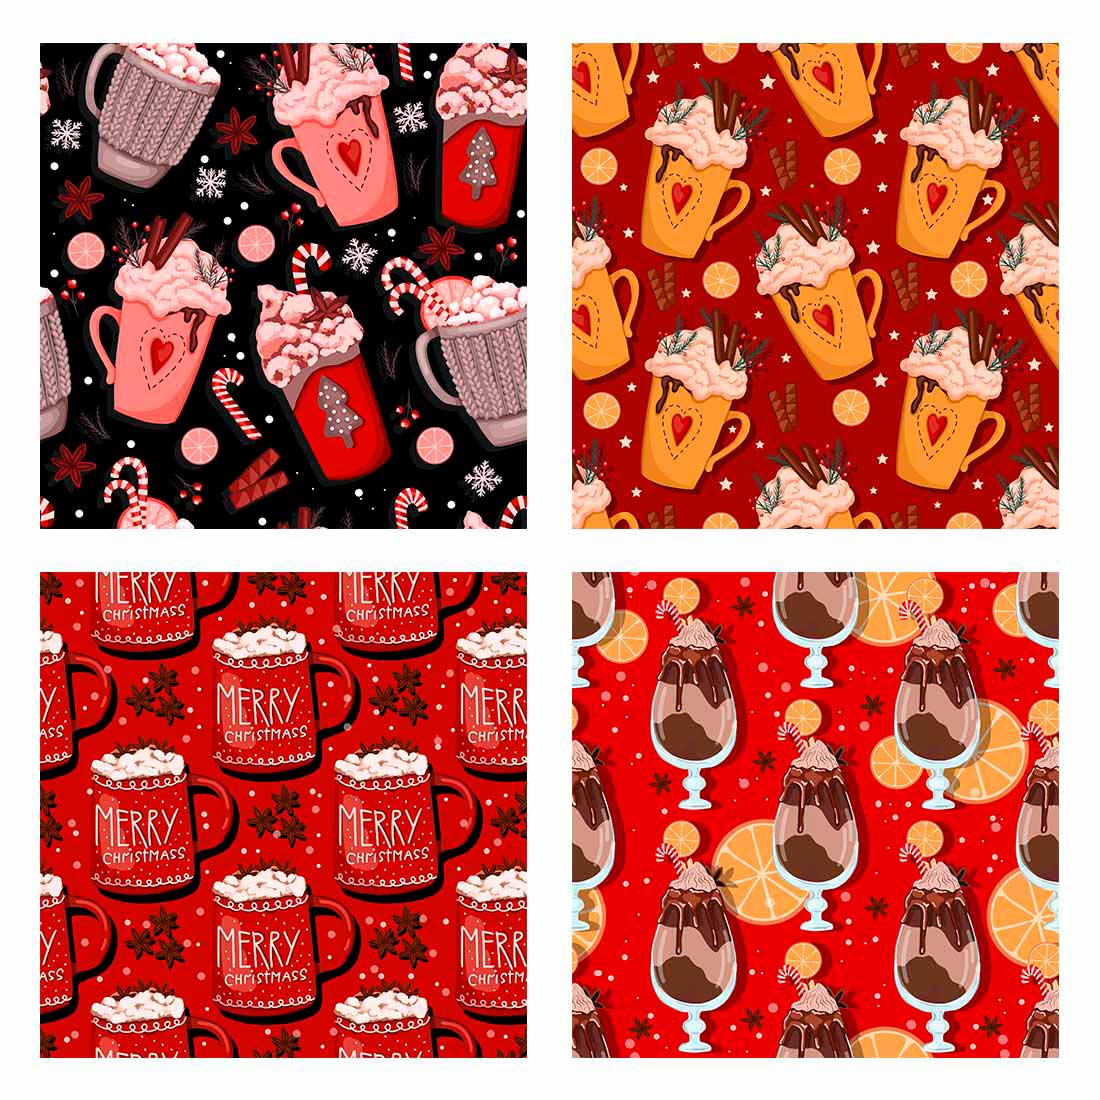 A pack of images of exquisite patterns with winter cocoa.